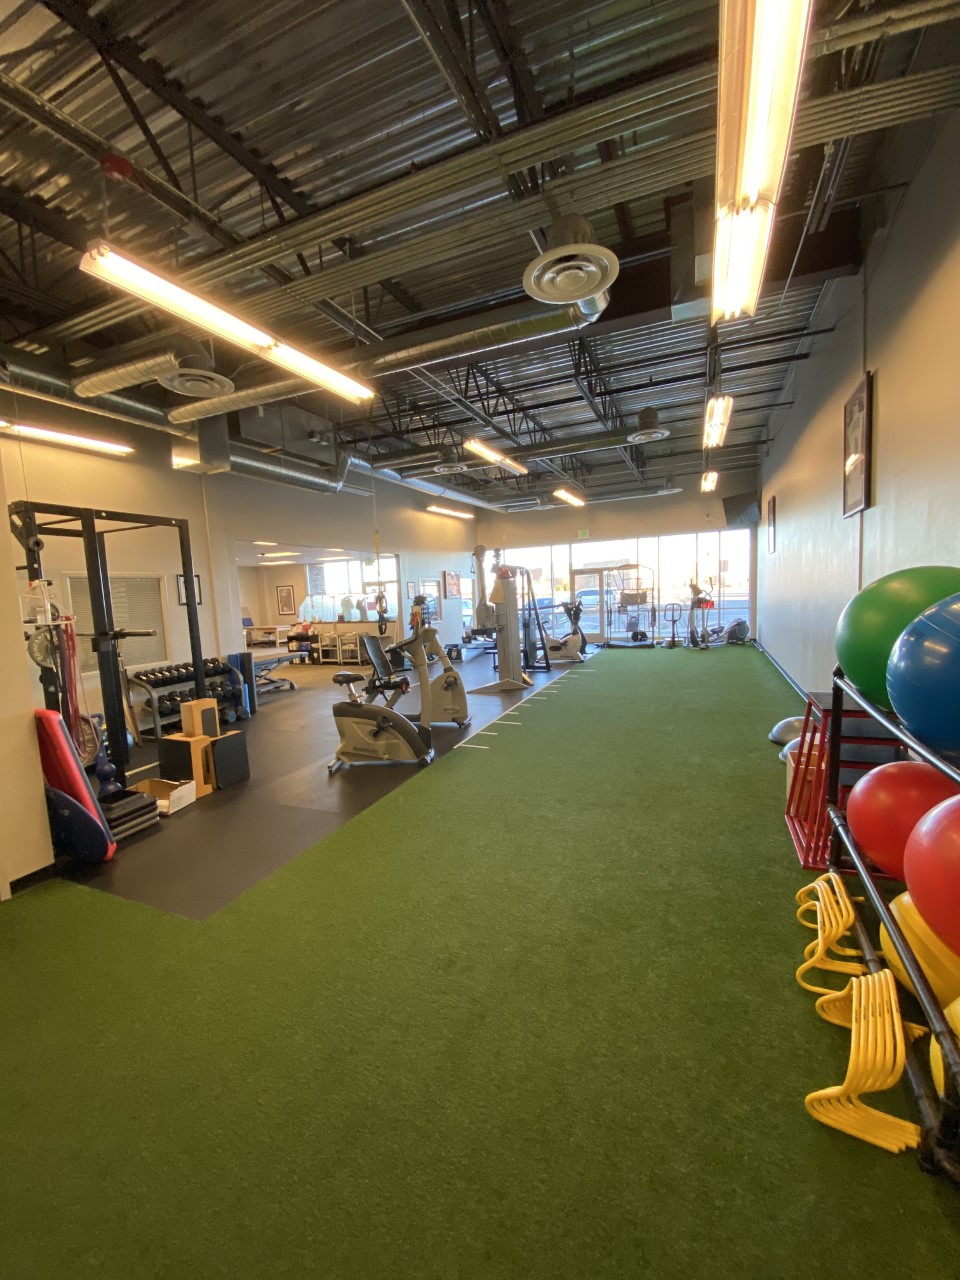 ProActive Physical Therapy
24300 E Smoky Hill Rd
Aurora